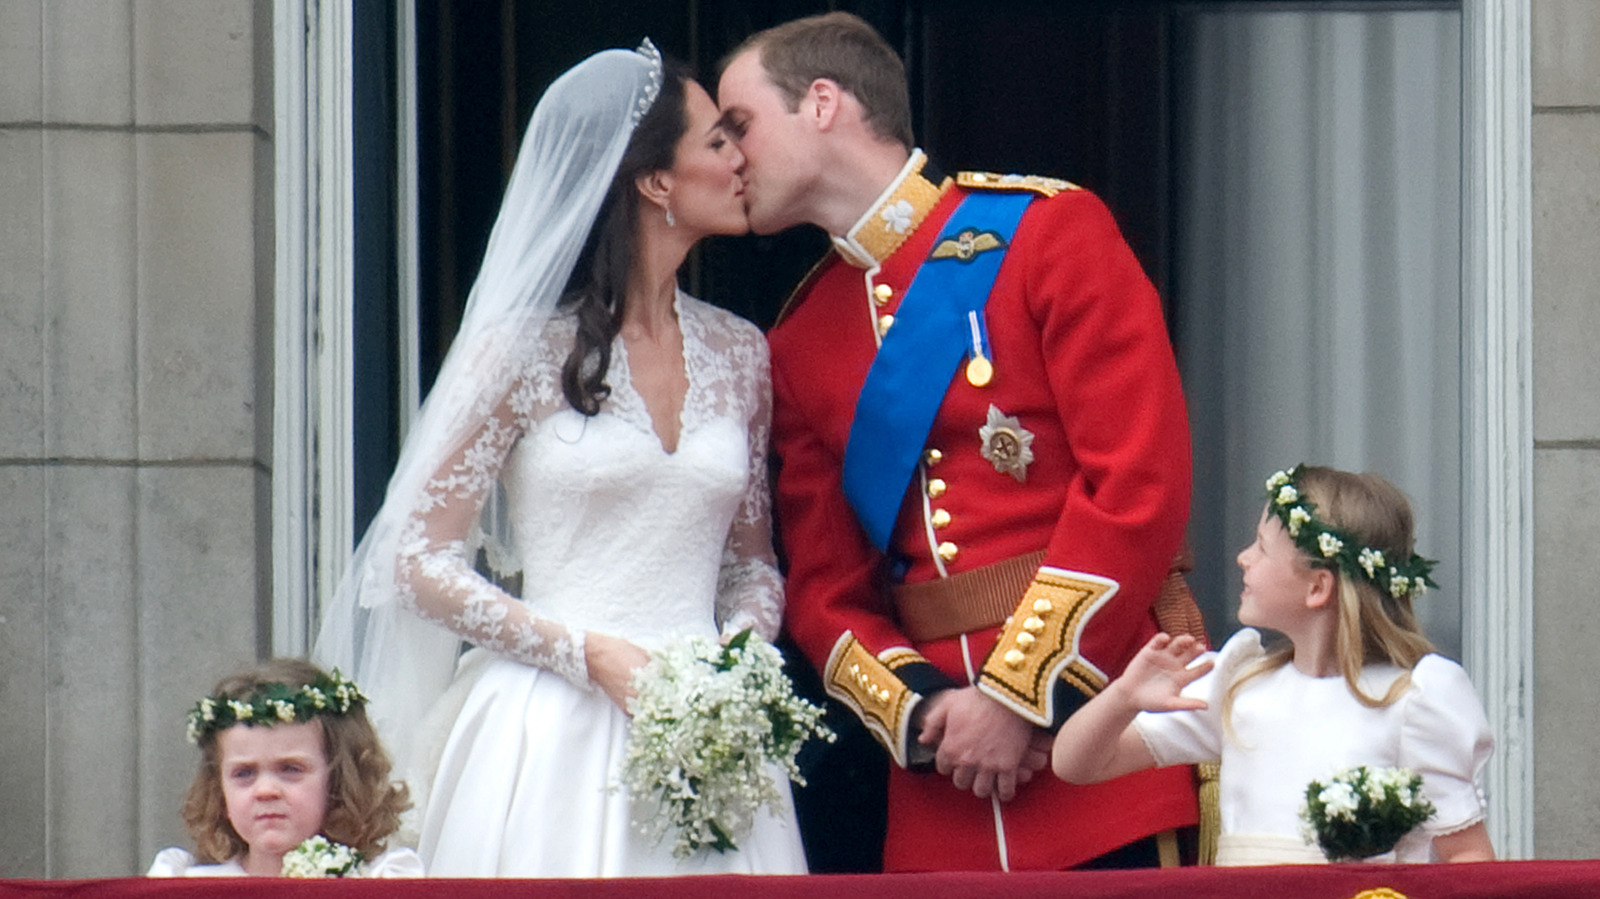 Expert Tells Us William's Wedding Day Body Language Crystalizes His True Feelings For Kate